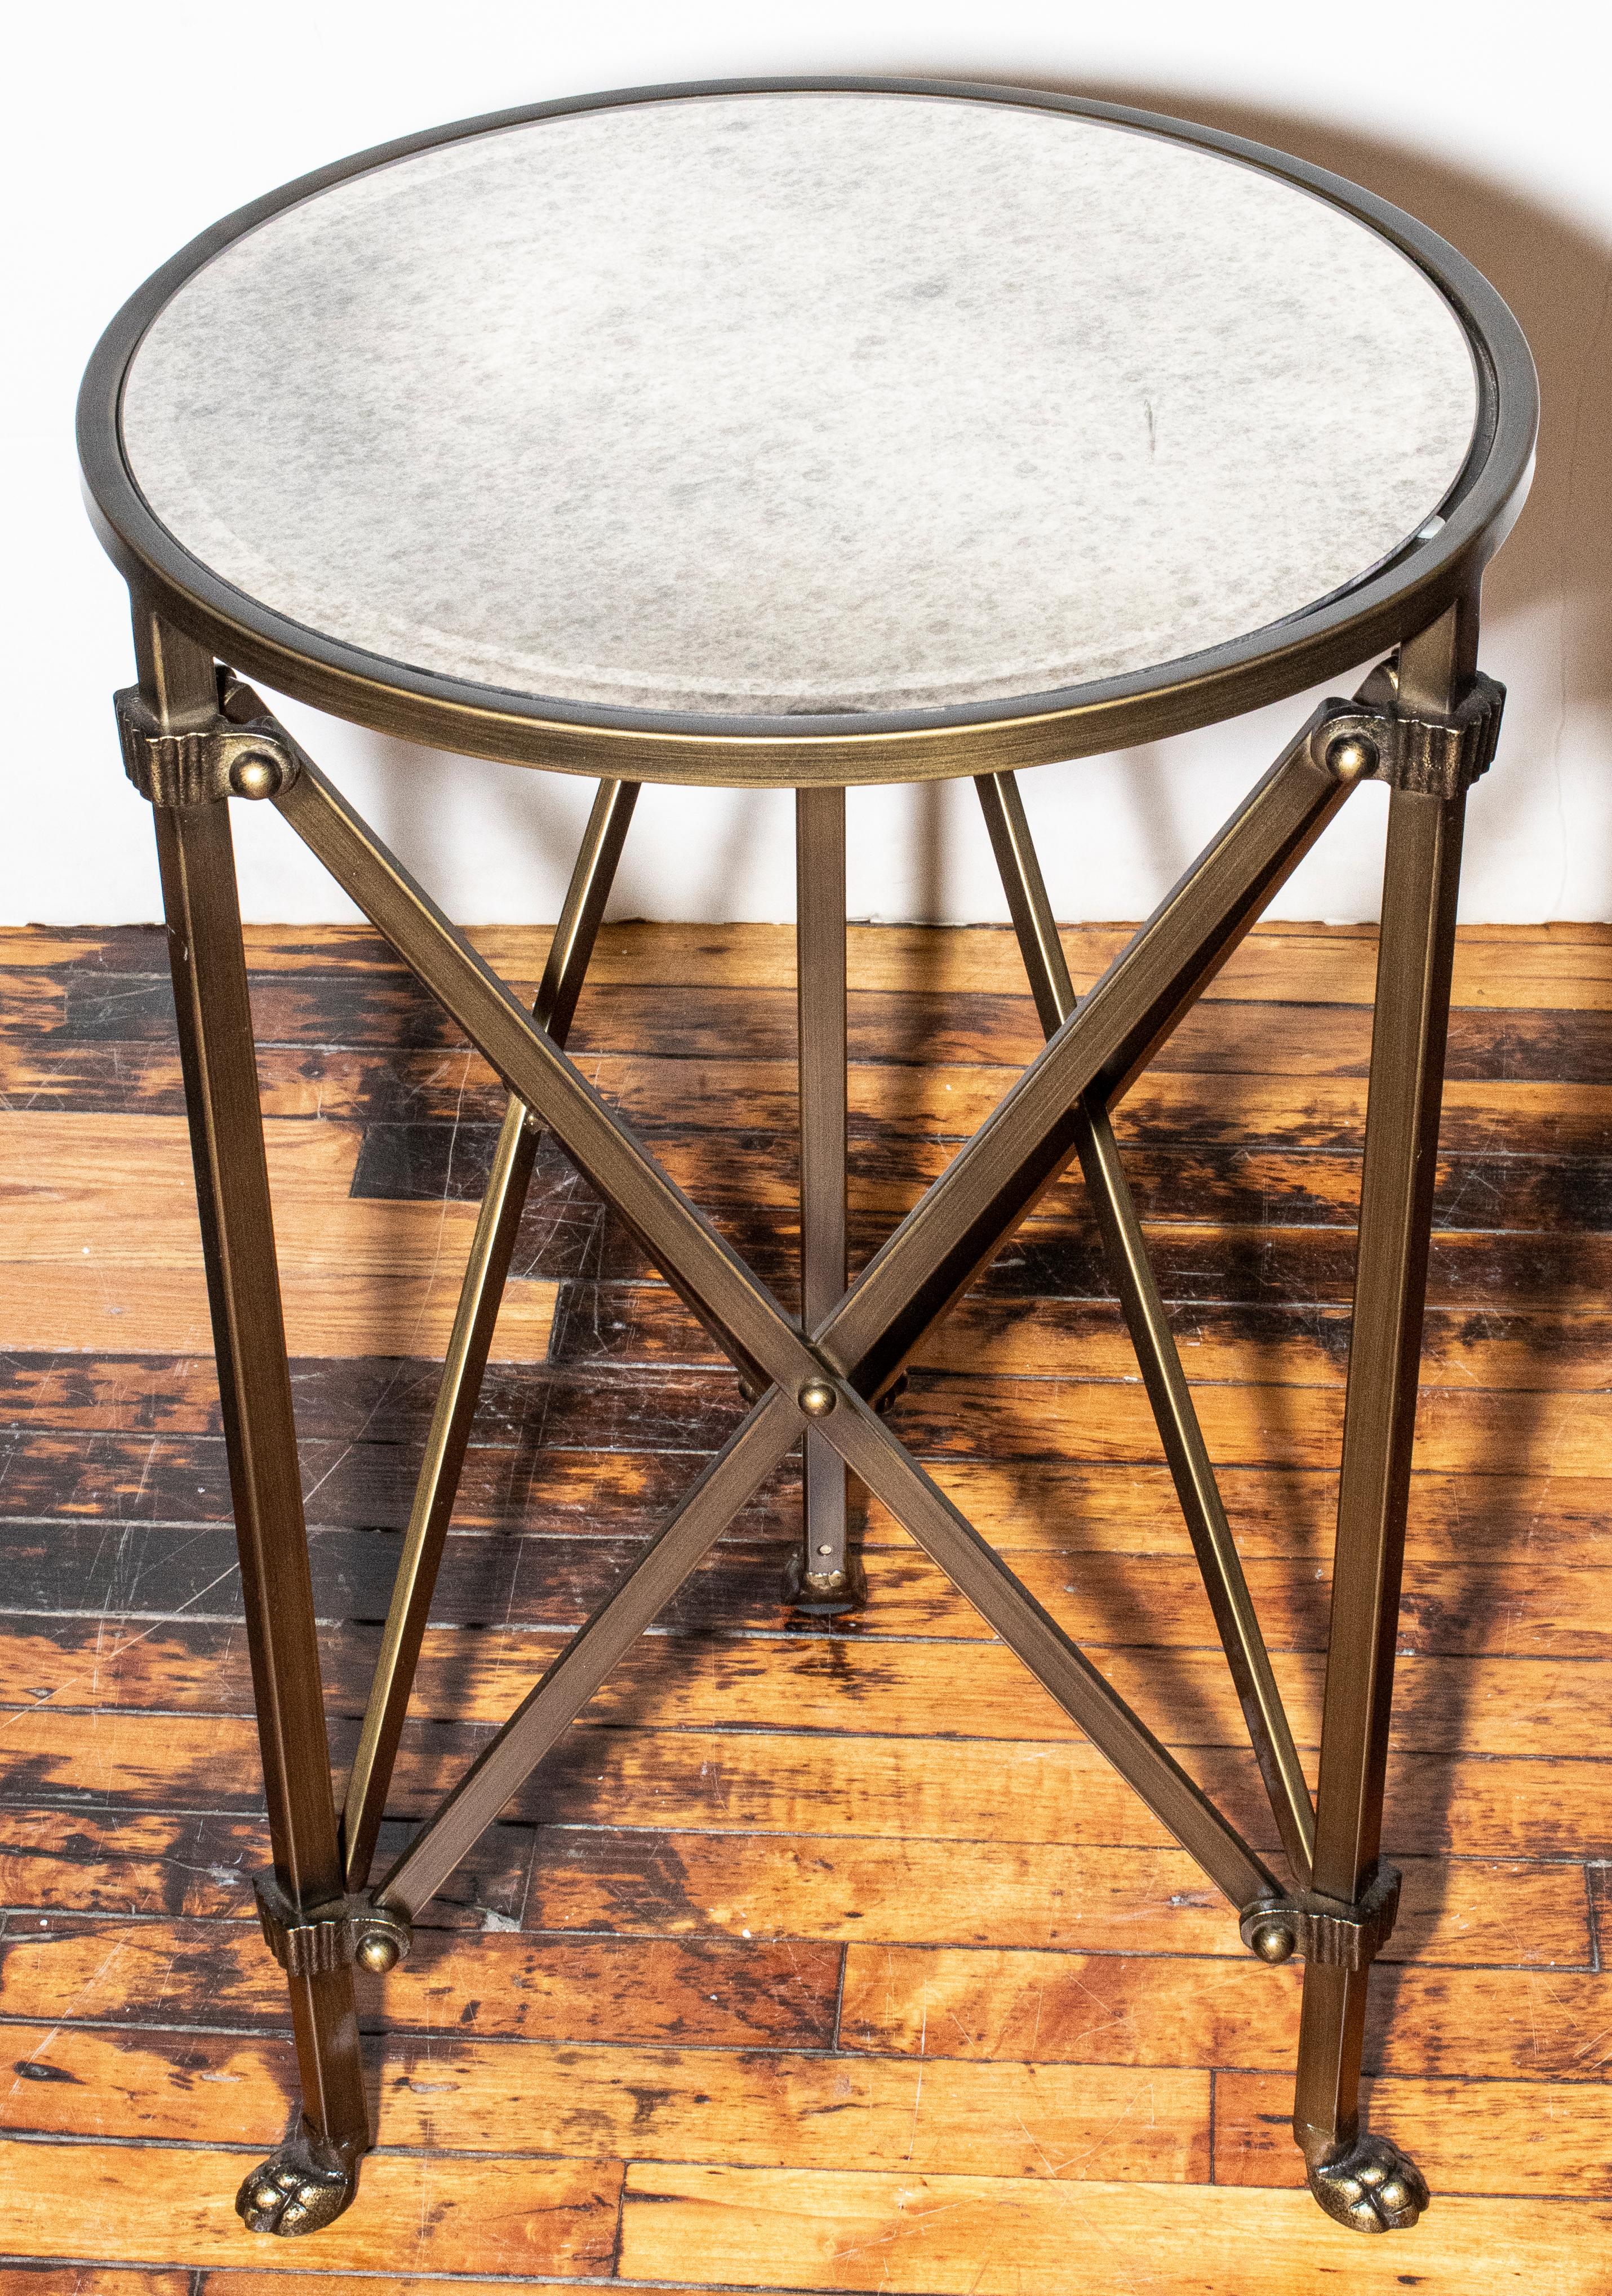 20th century French side table with brass base and round mirrored top. Paw feet detail on base.